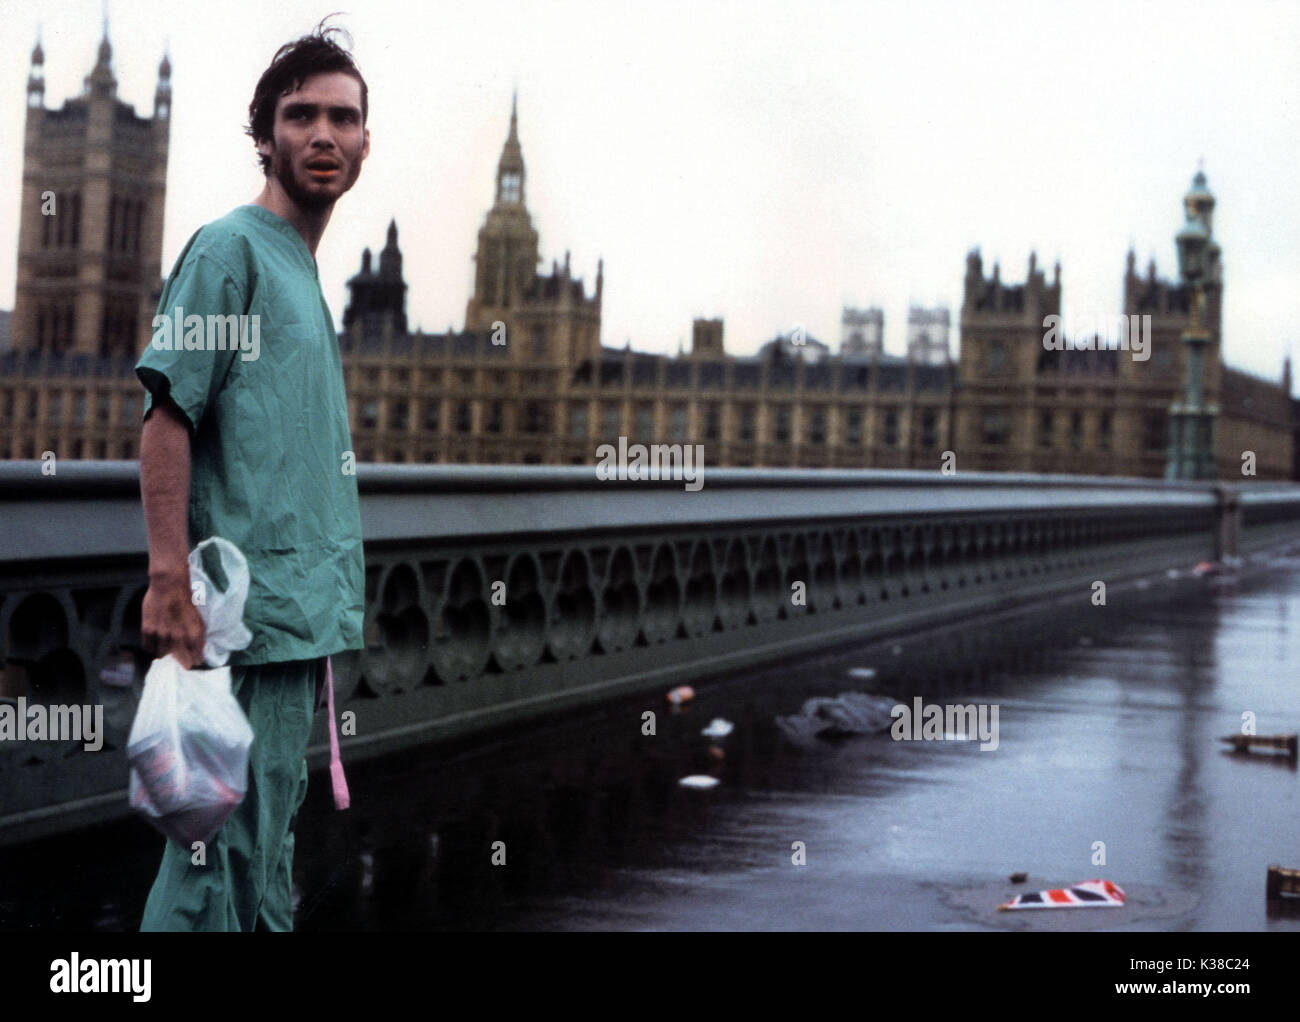 28 DAYS LATER CILLIAN MURPHY LOCATION: PALACE OF WESTMINSTER, LONDON     Date: 2002 Stock Photo